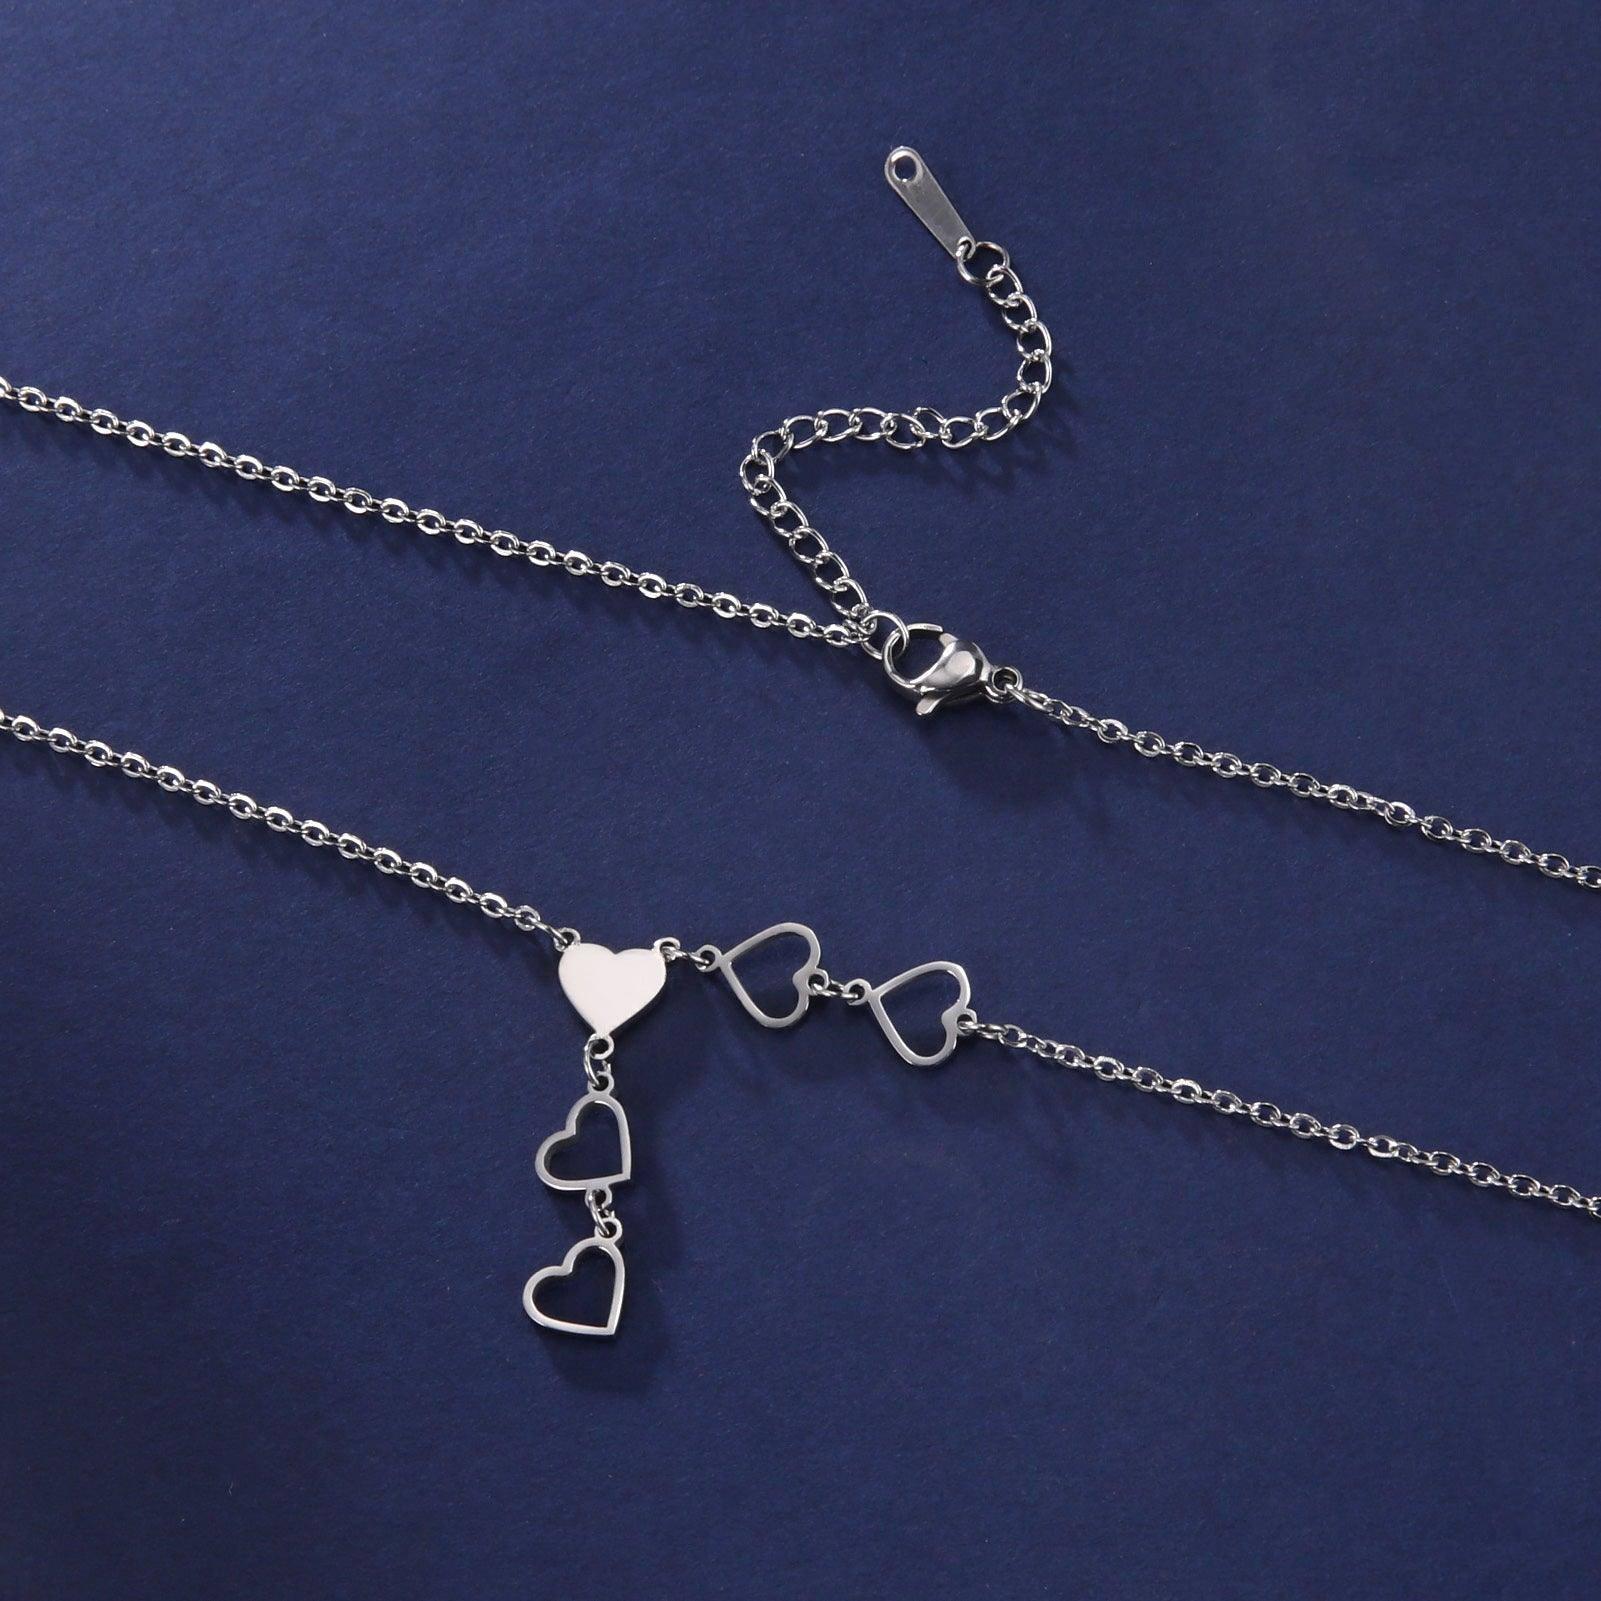 Chic Heart Chain Necklaces in Silver and Gold-7